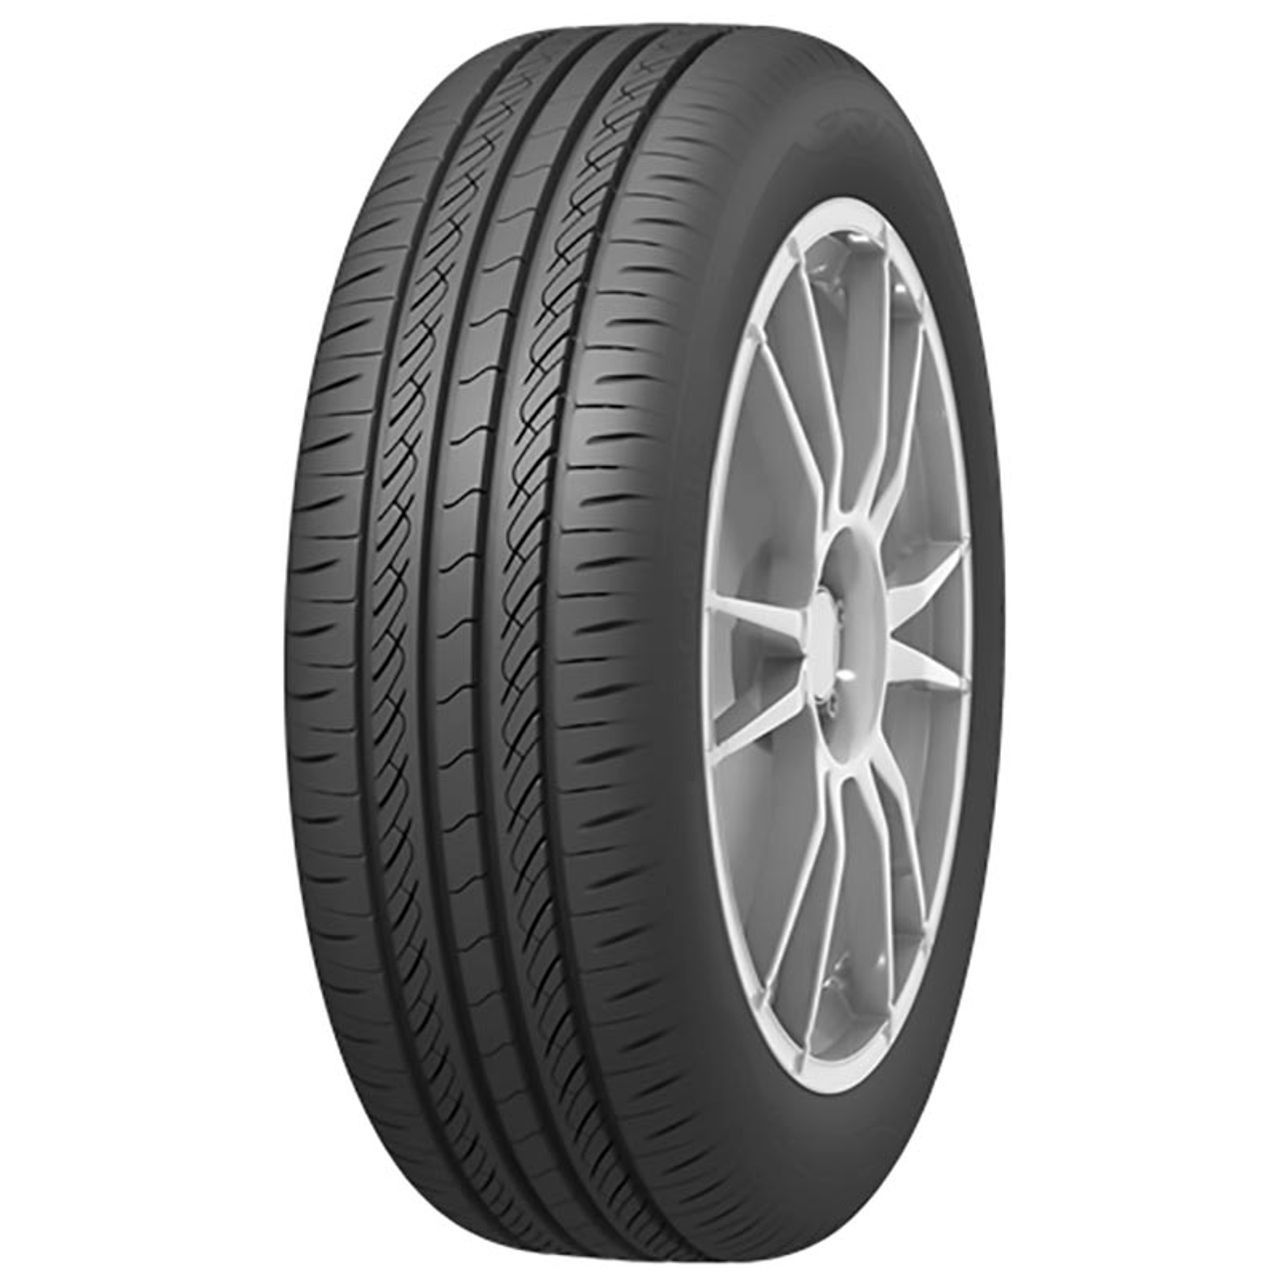 INFINITY ECOSIS 195/60R15 88V BSW